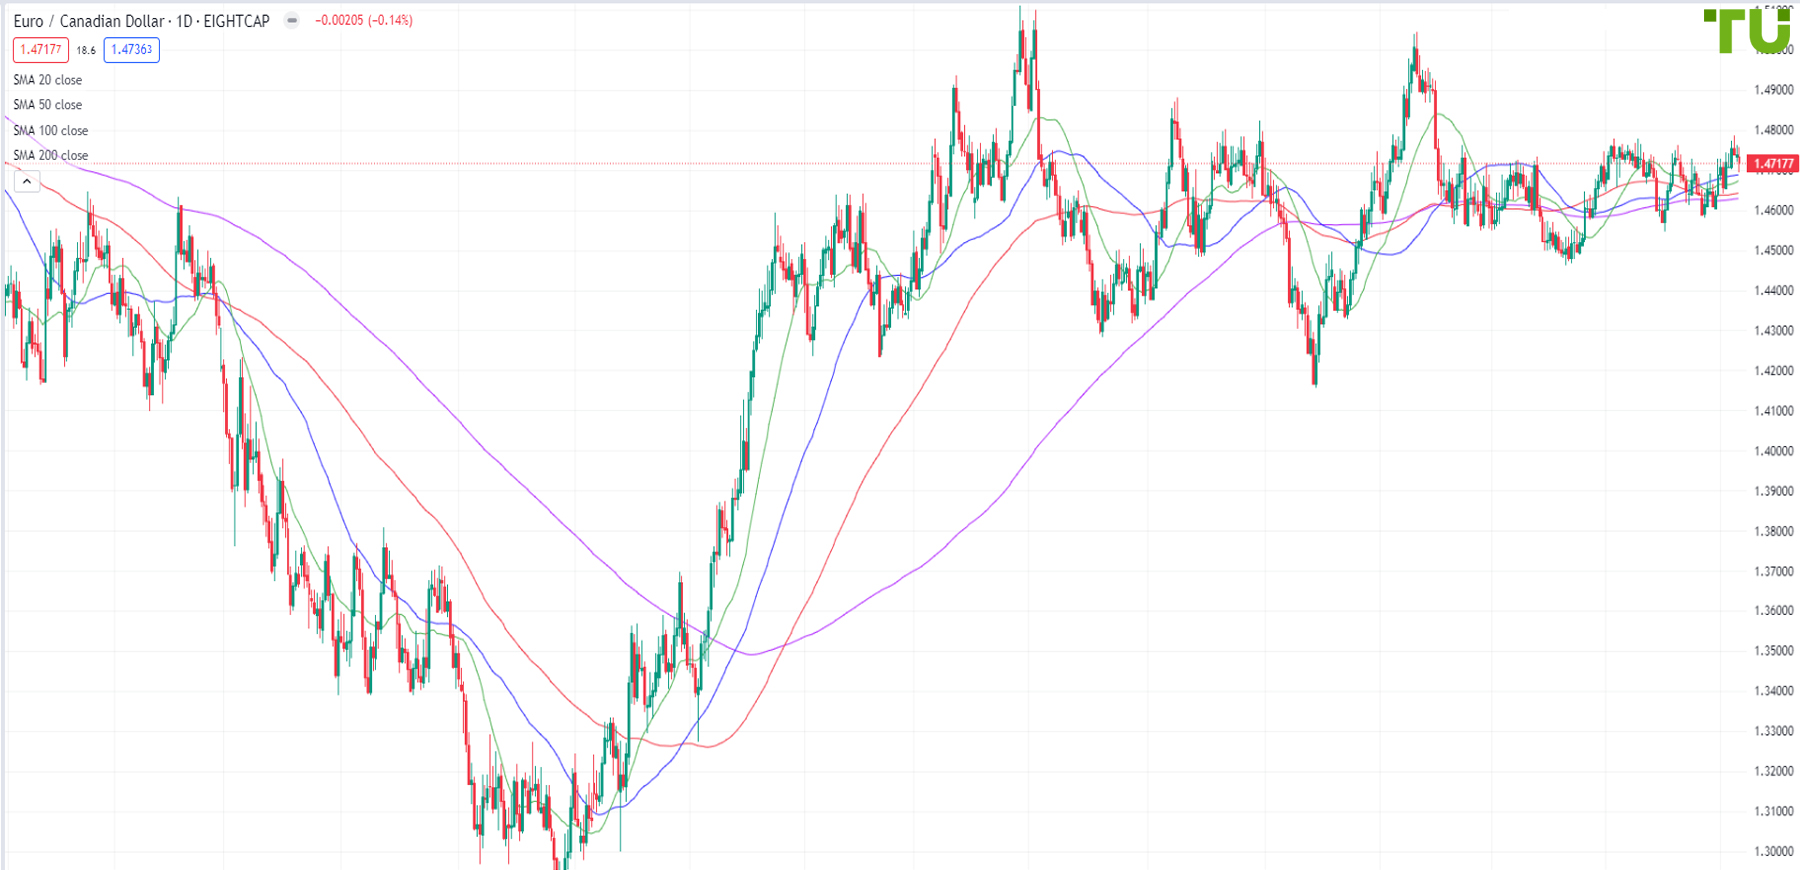 EUR/CAD is sold from resistance at 1.4755